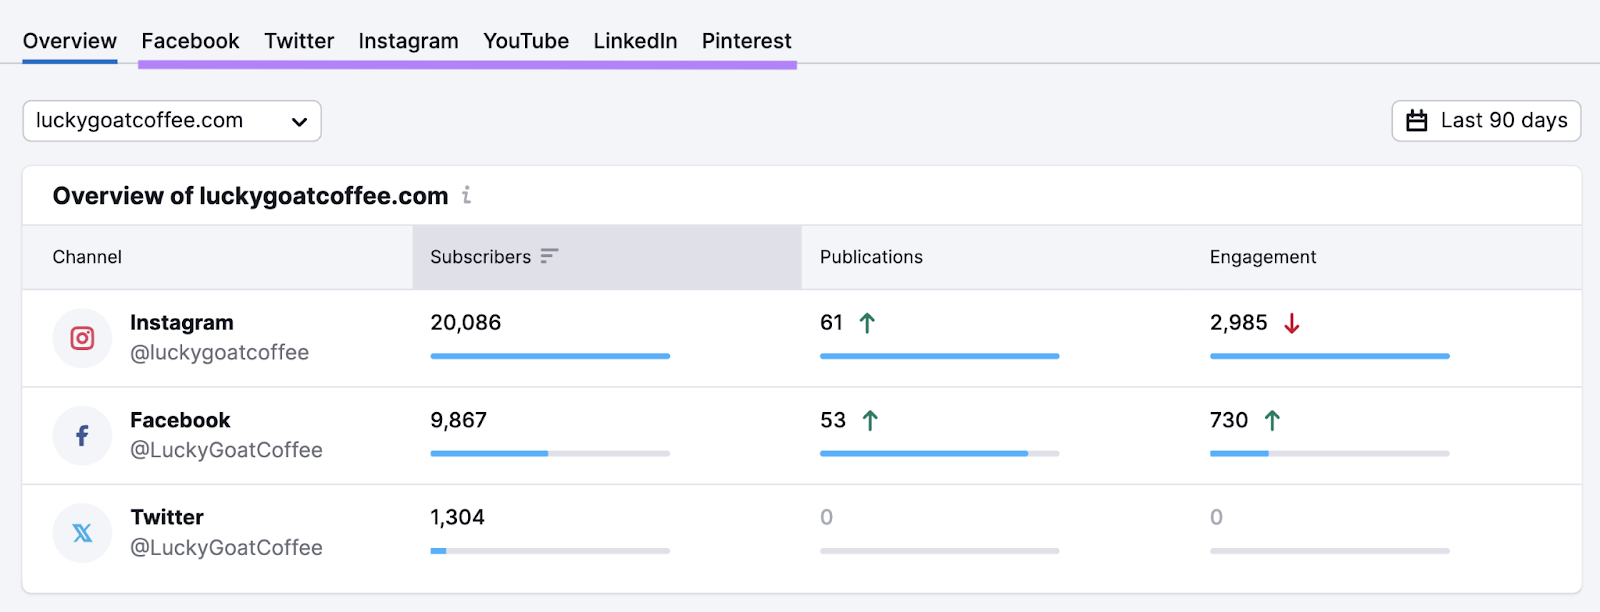 facebook, twitter, instagram, youtube, linkedin, and pinterest tabs successful  Social Tracker tool